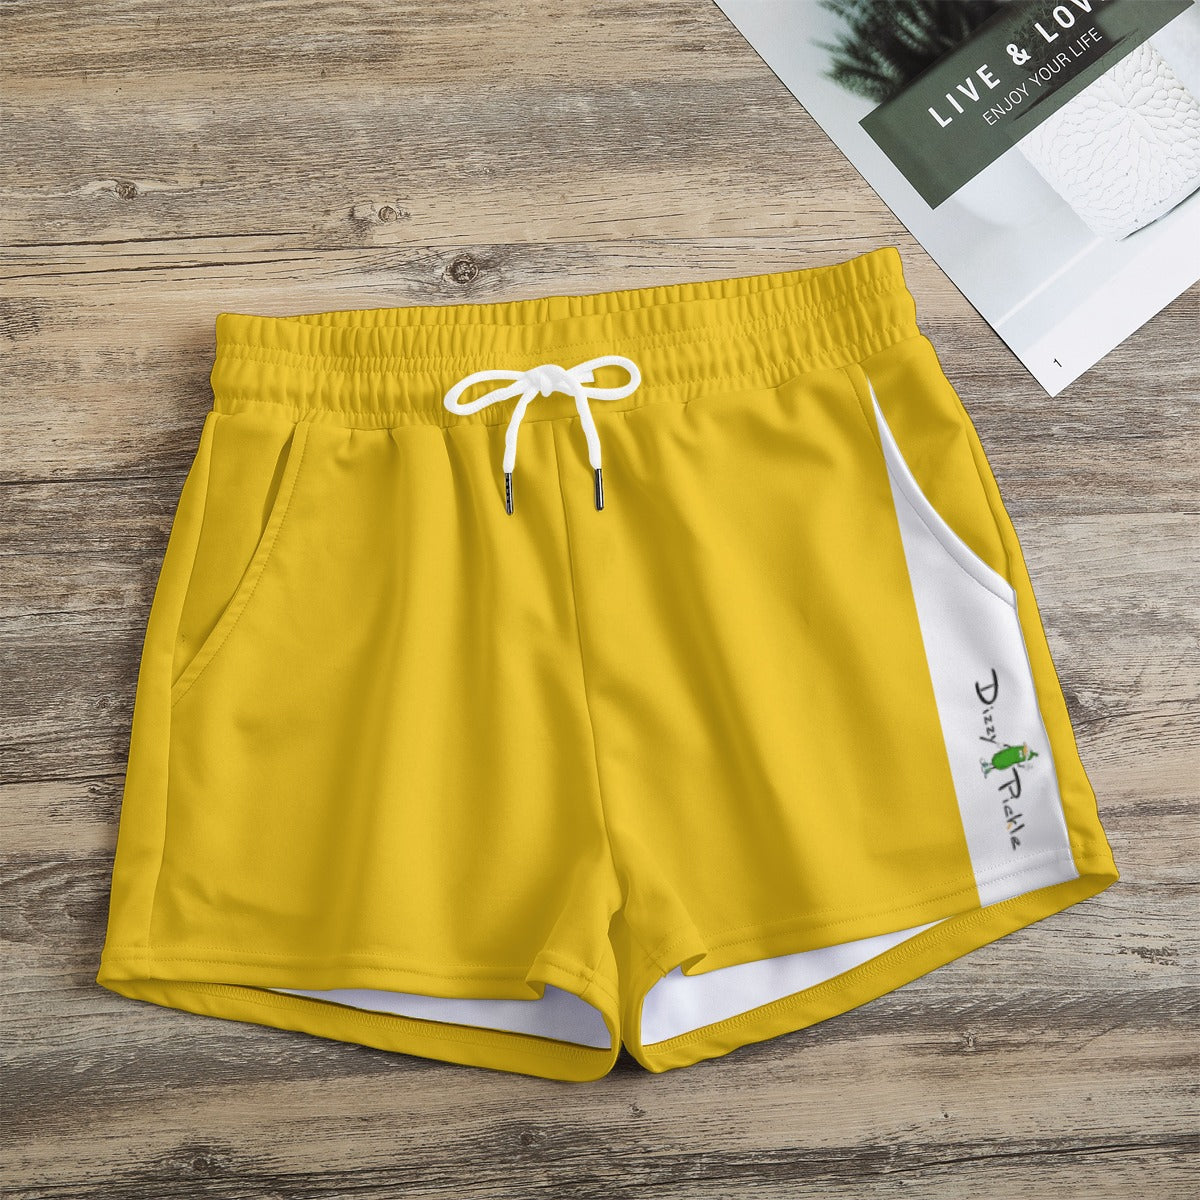 Dizzy Pickle DZY P Classic Women's Pickleball Casual Shorts with Pockets Gold